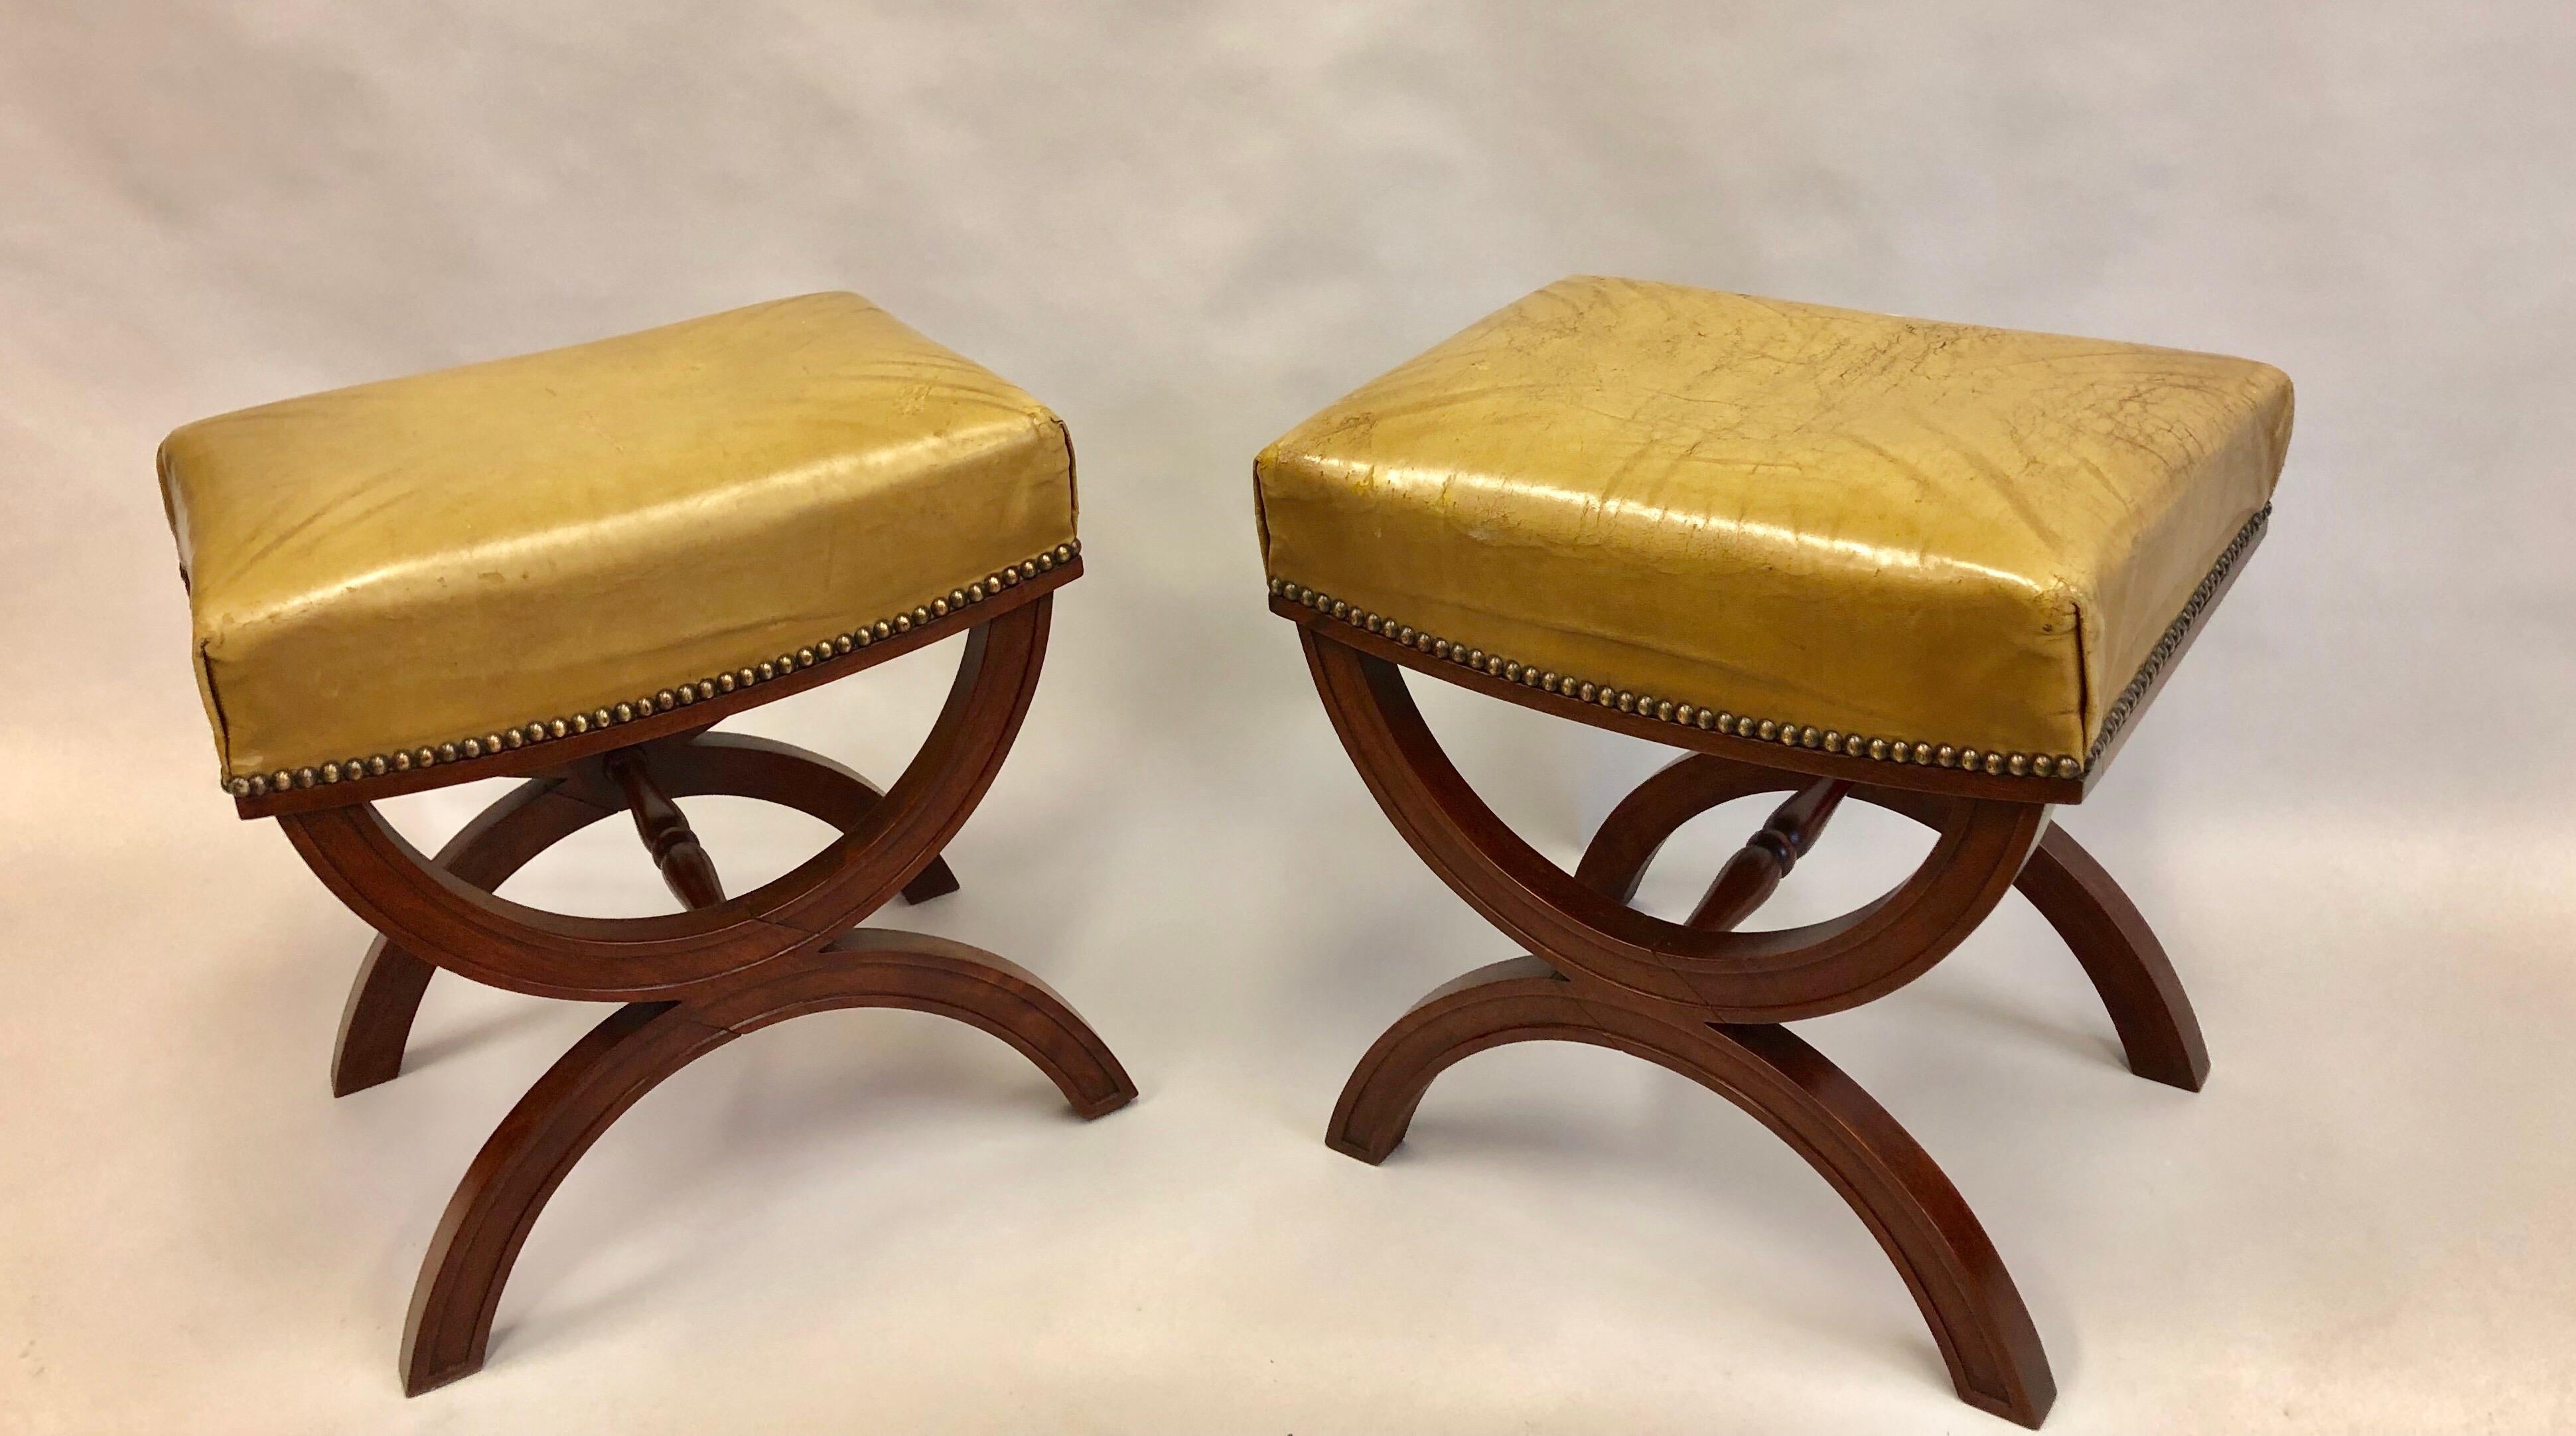 20th Century French Modern Neoclassical Mahogany & Leather Benches/ Stools, Andre Arbus, Pair For Sale